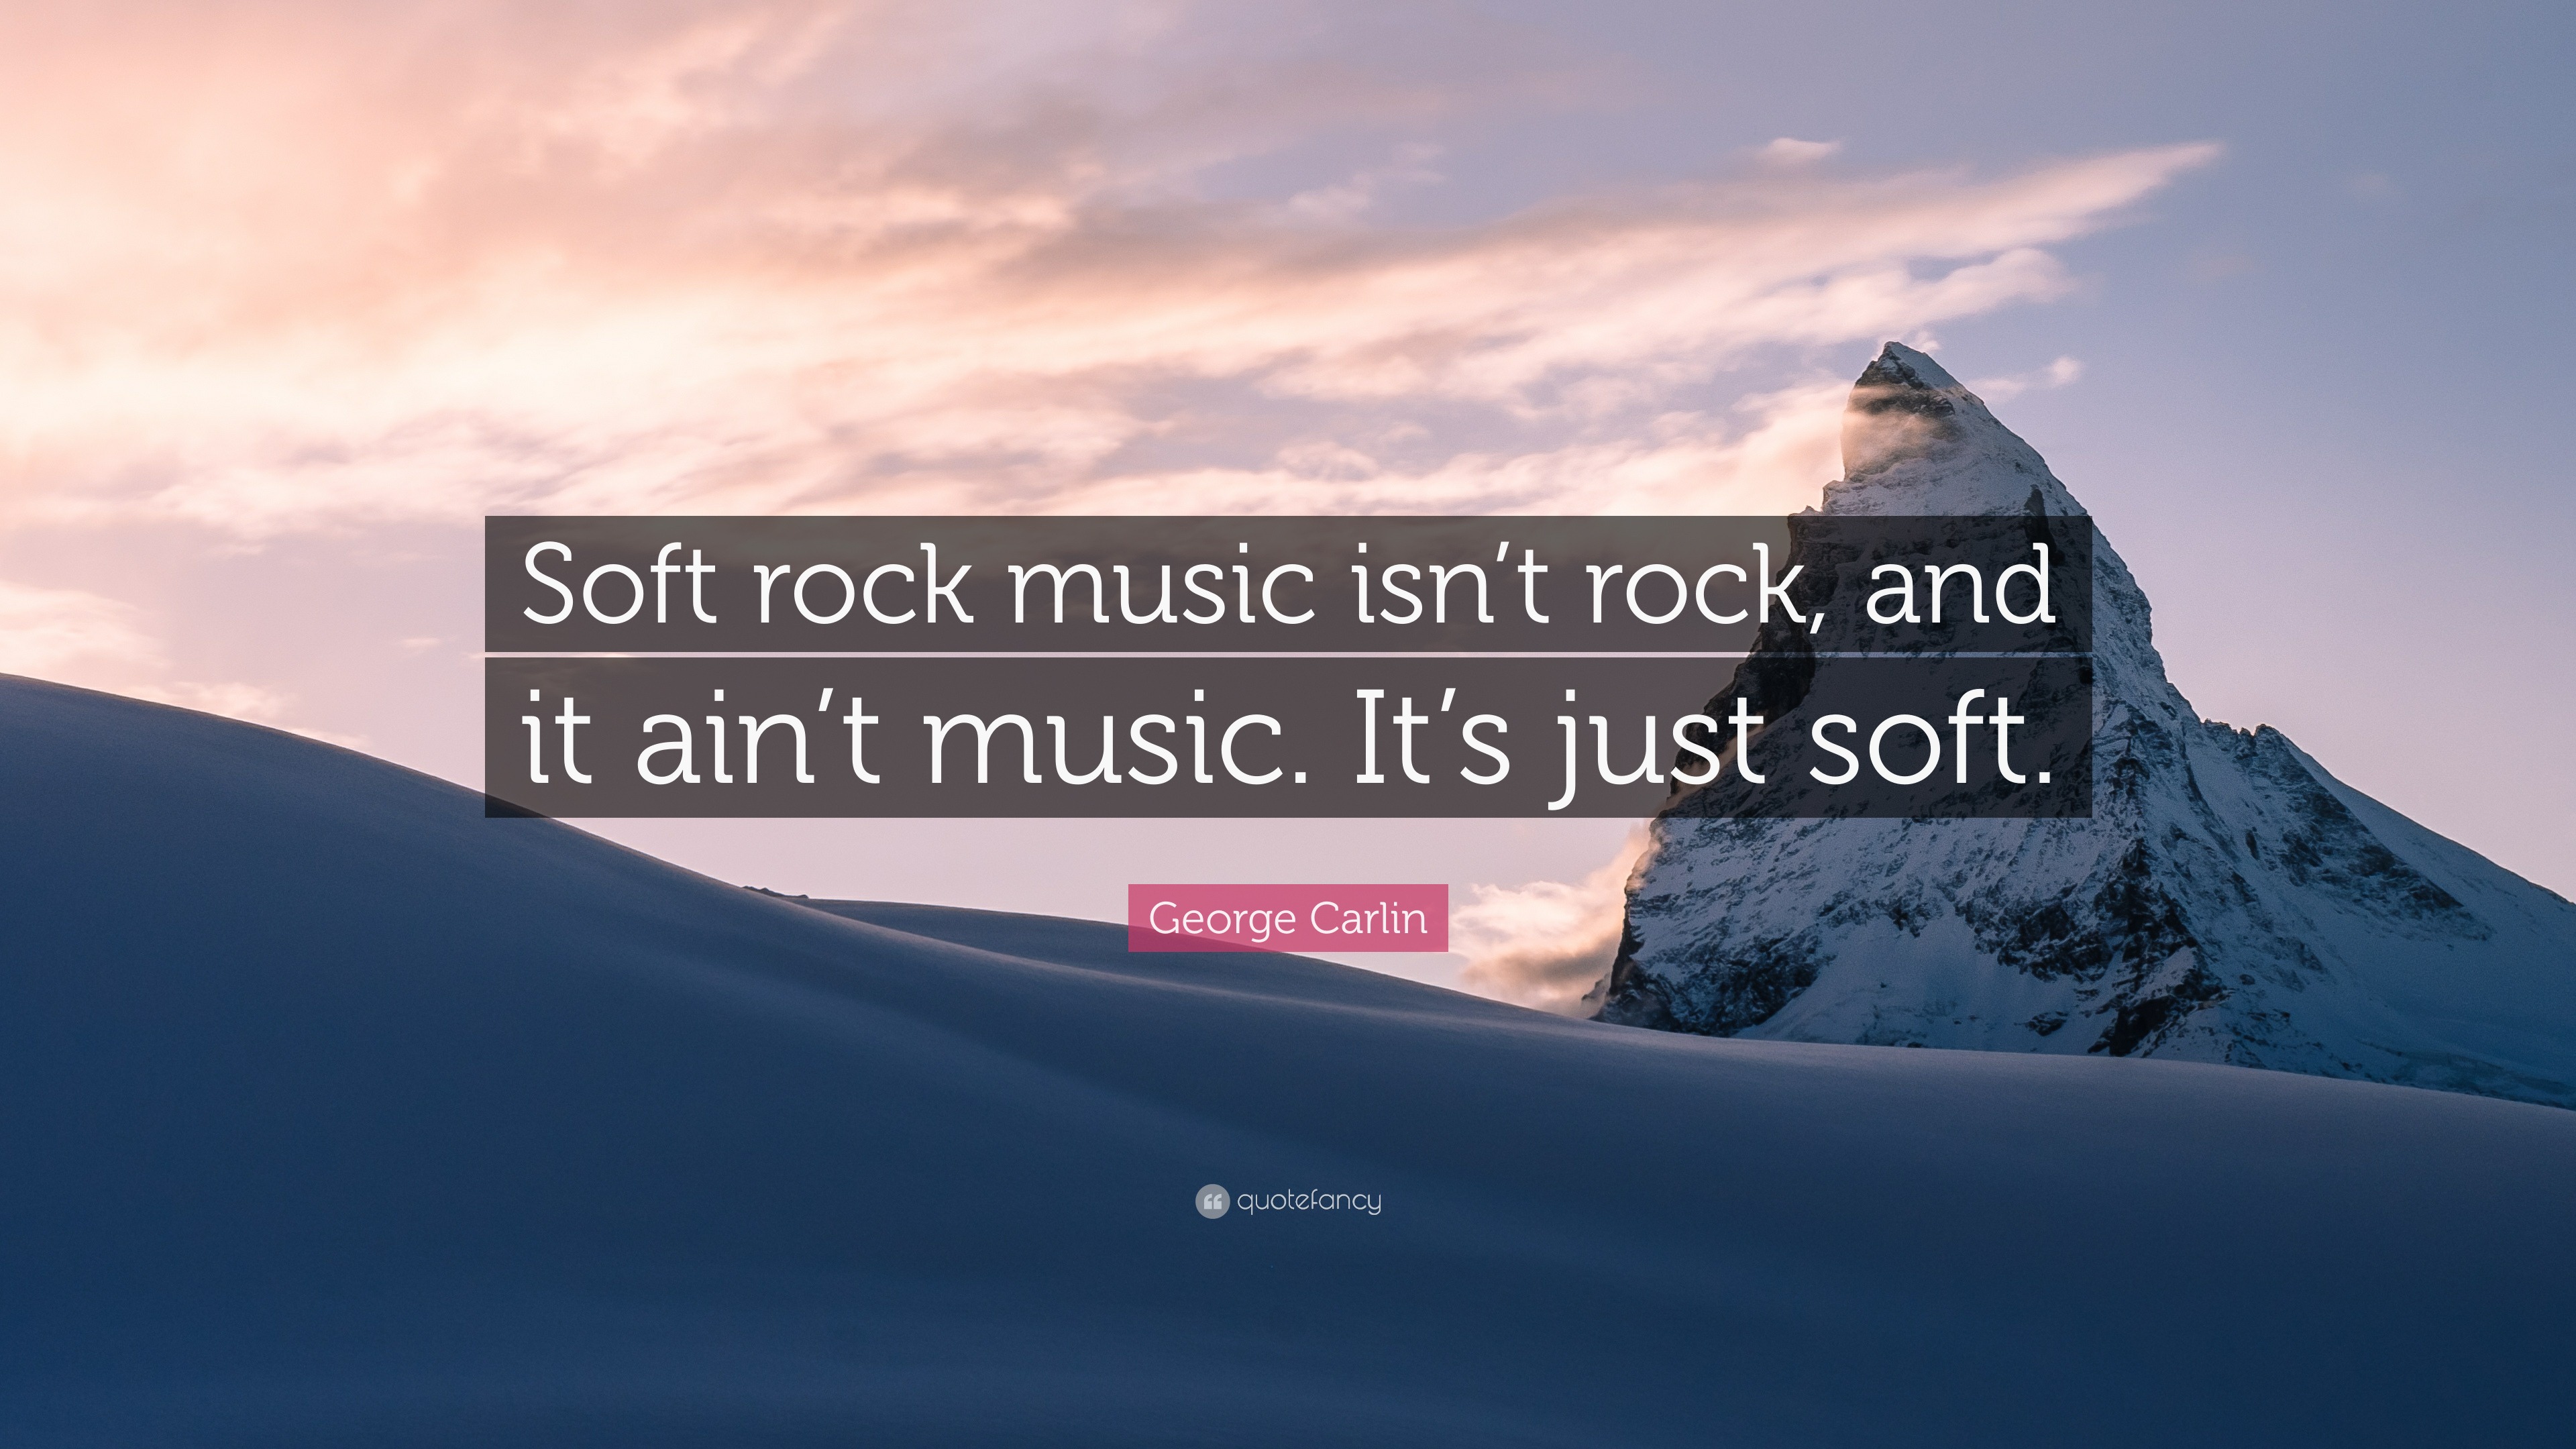 George Carlin quote: Soft rock music isn't rock, and it ain't music. It's